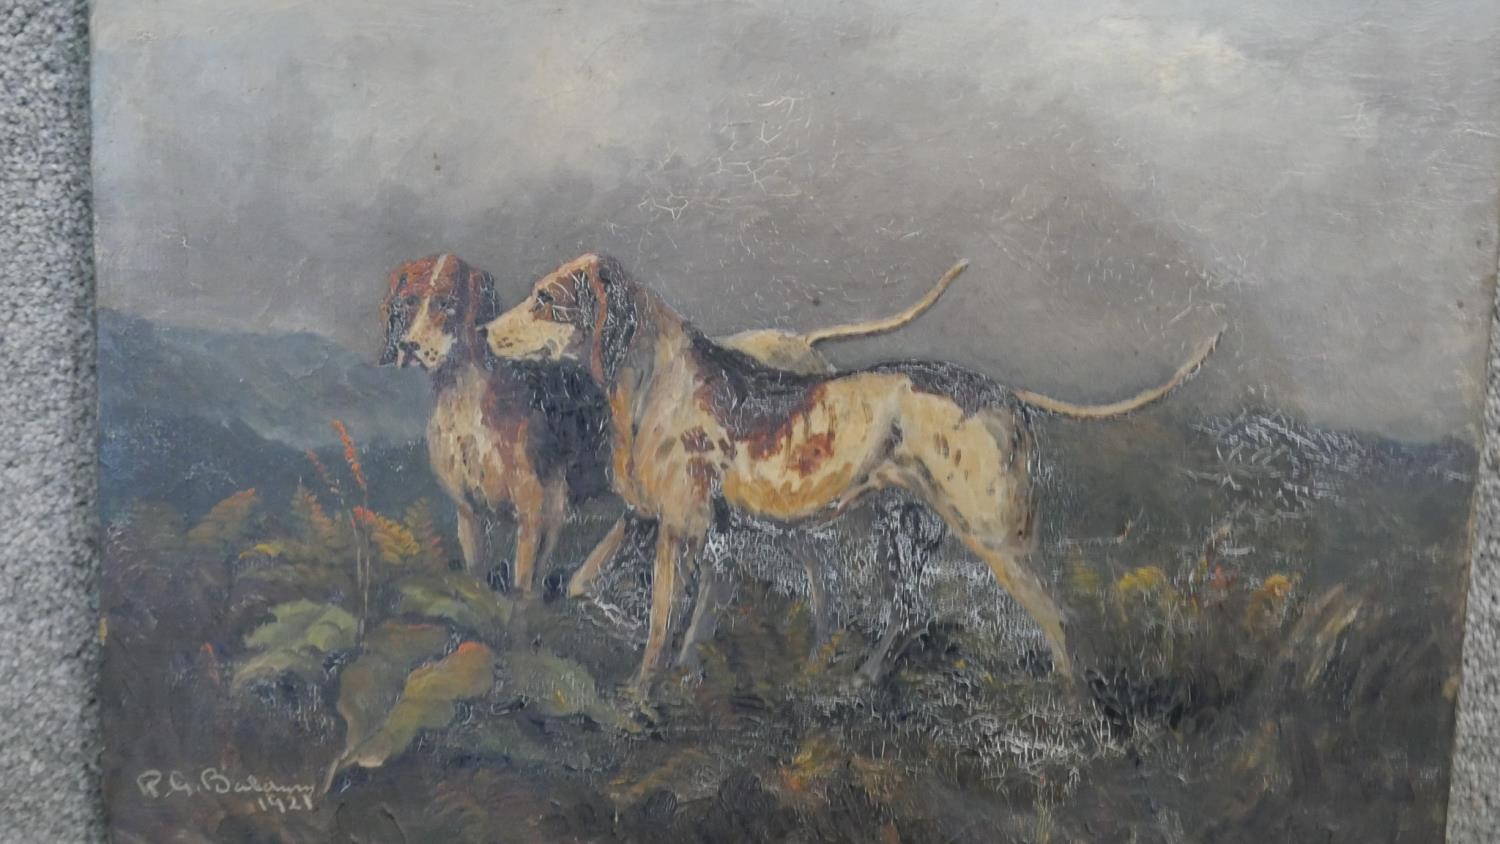 Two oils on canvas, one depicting two dogs on a moorland, signed R.G. Baldwin, measuring H.37 W. - Image 4 of 6